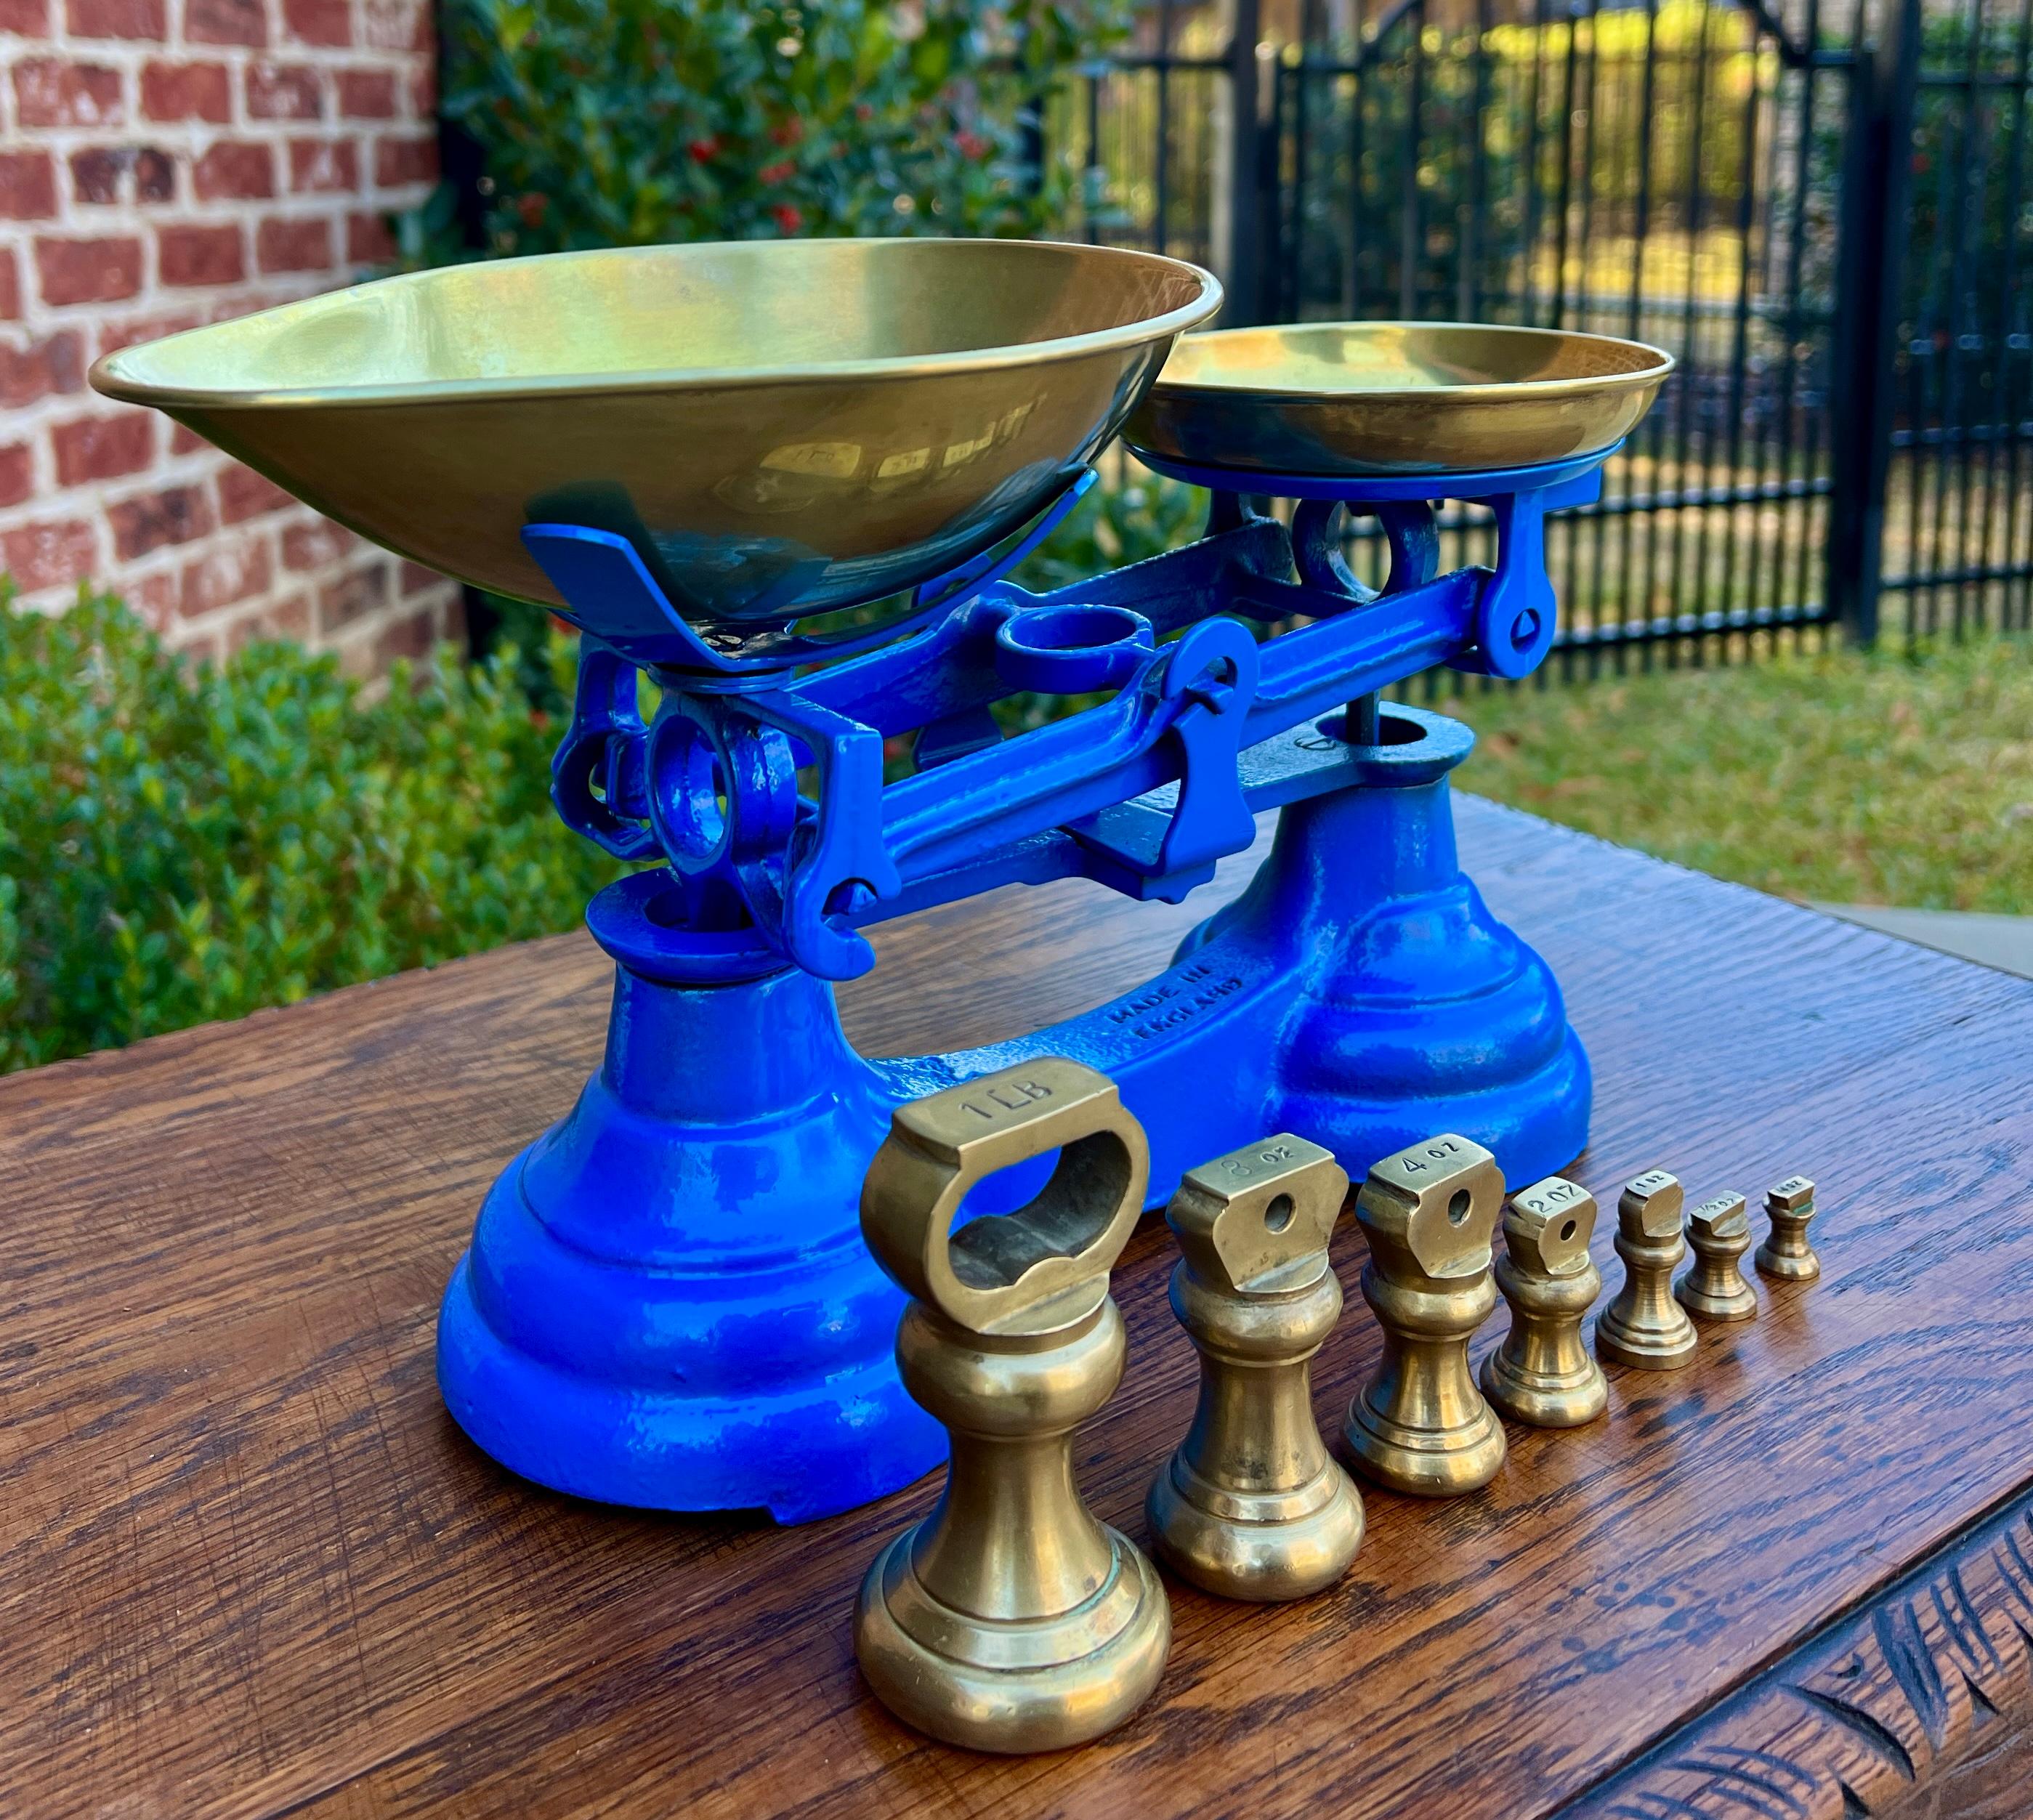 Edwardian Antique English Shop Scale 7 Graduated Weights With Brass Pans Blue For Sale